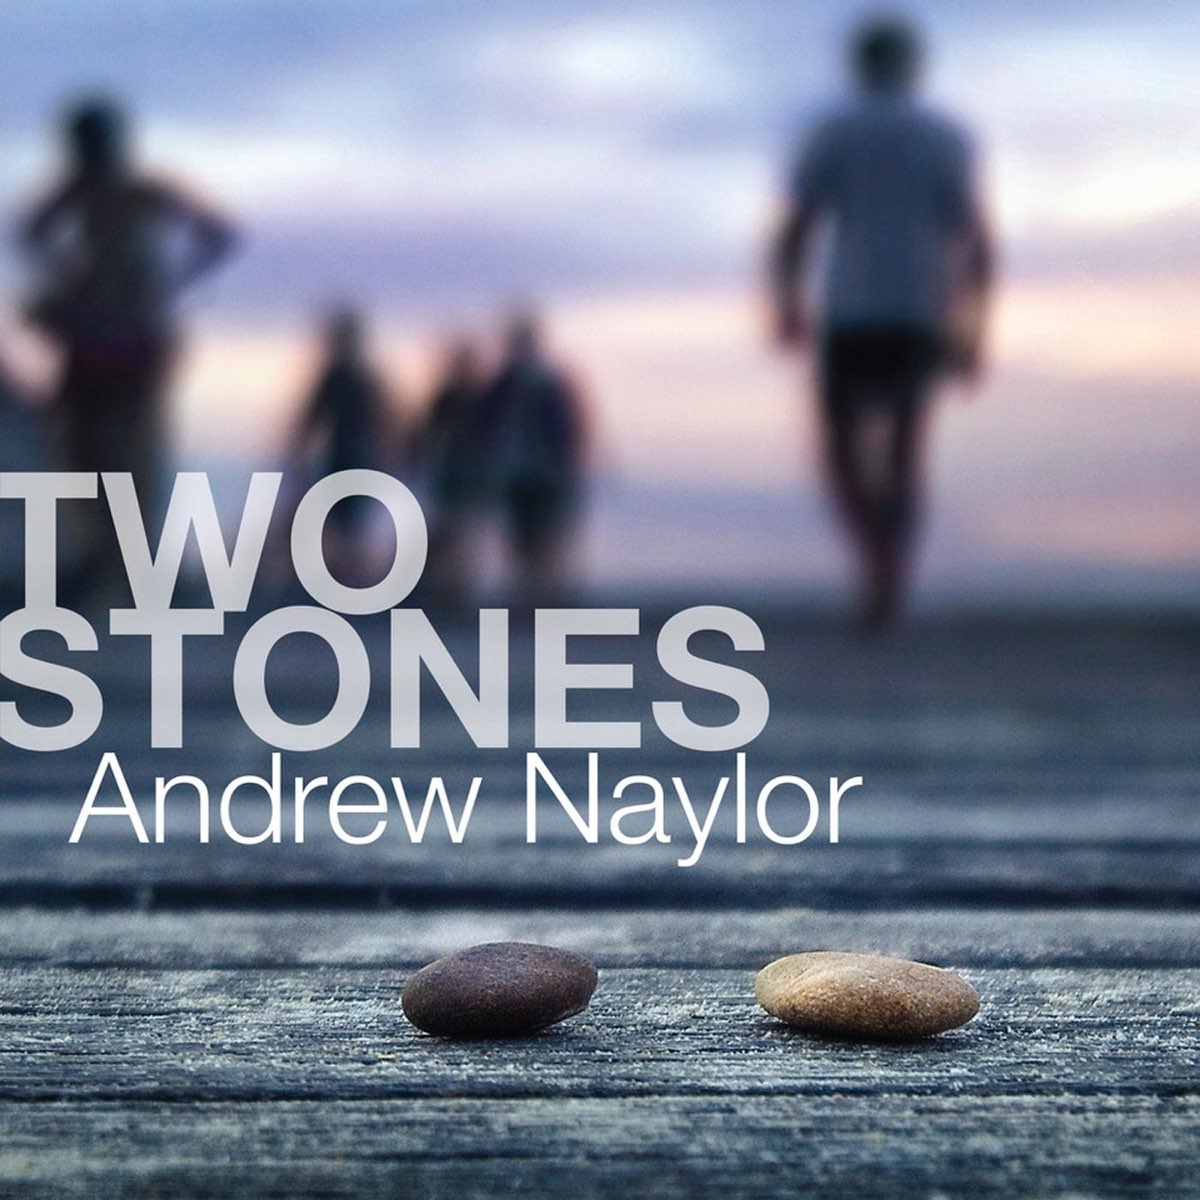 The two stones. Нейлор 2. Helen Naylor "two Lives". Andy Stone. Two Stones Fall and Hit a person.